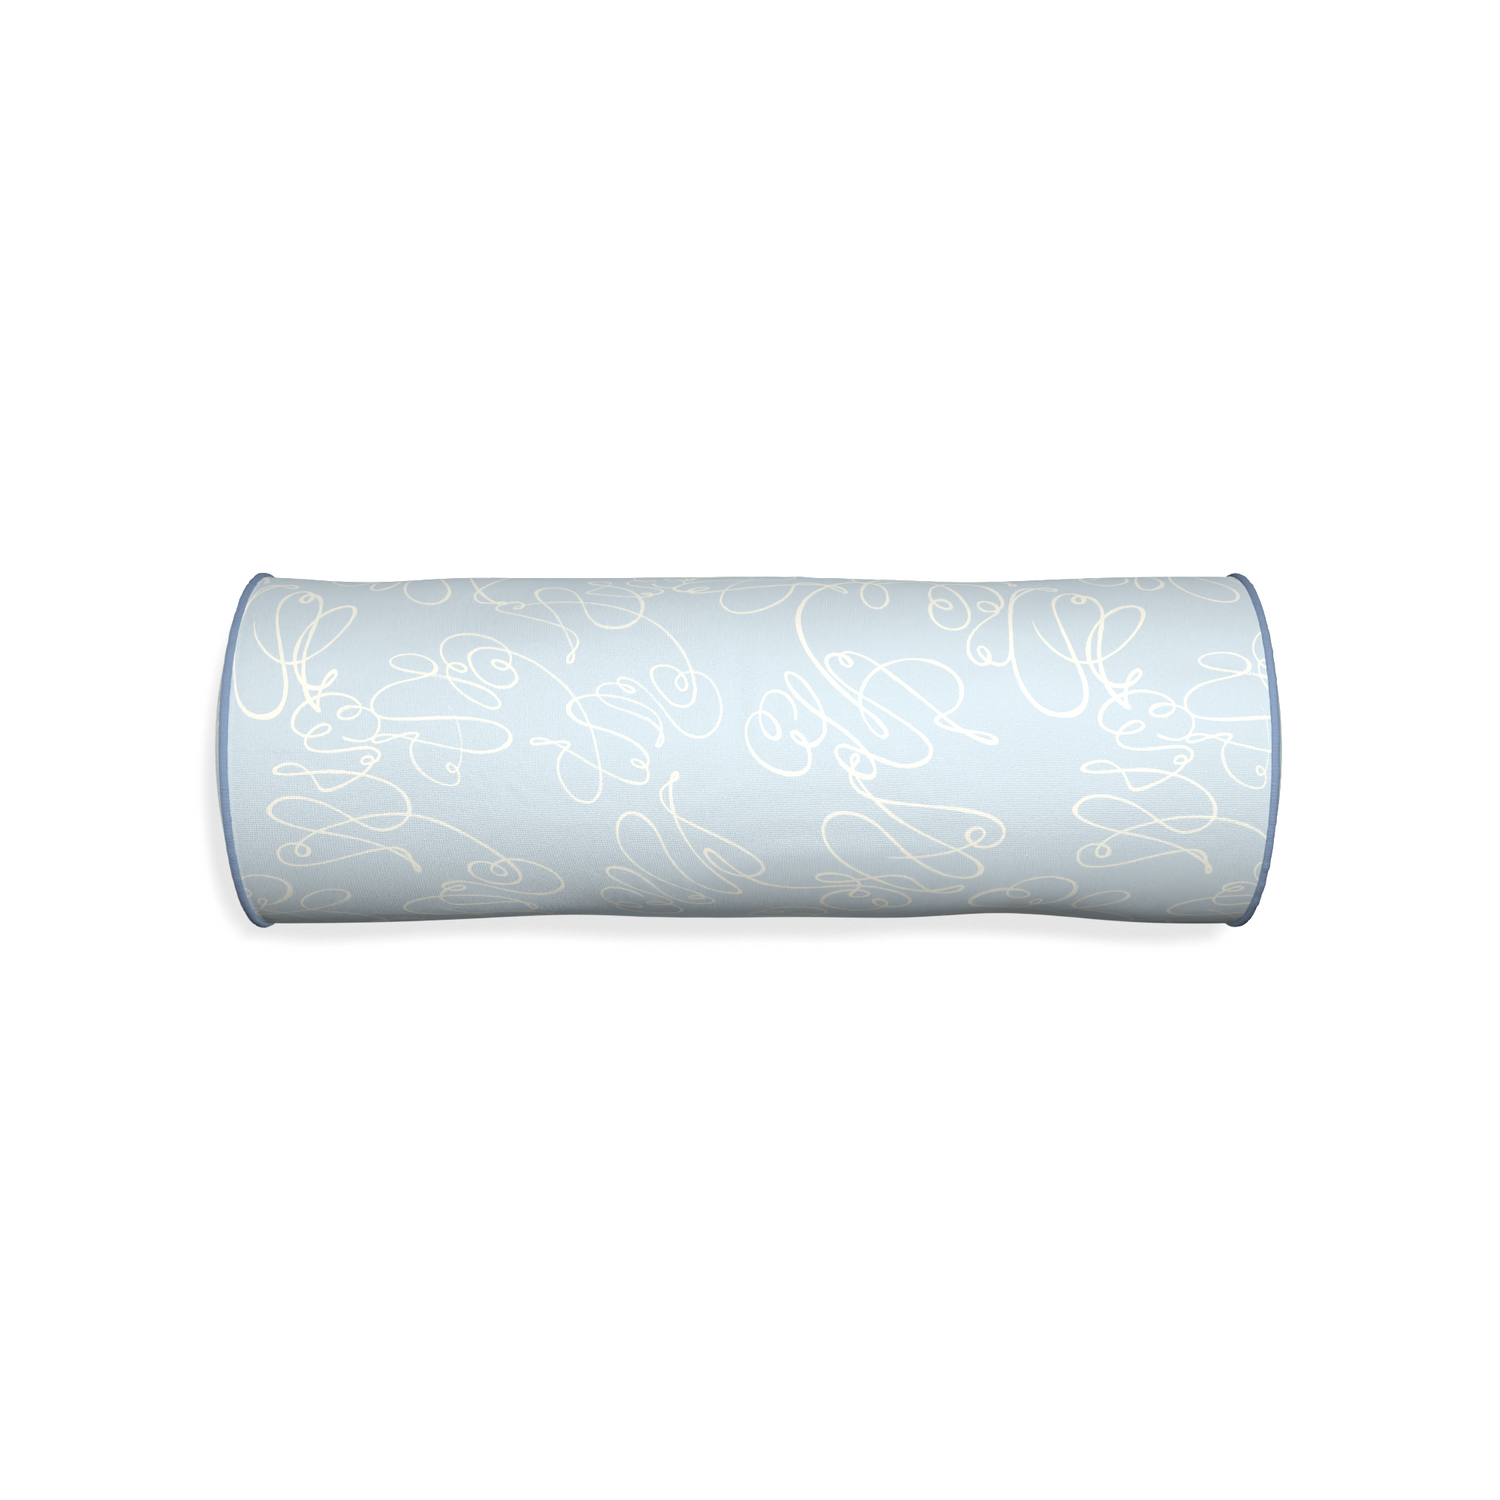 Bolster mirabella custom pillow with sky piping on white background